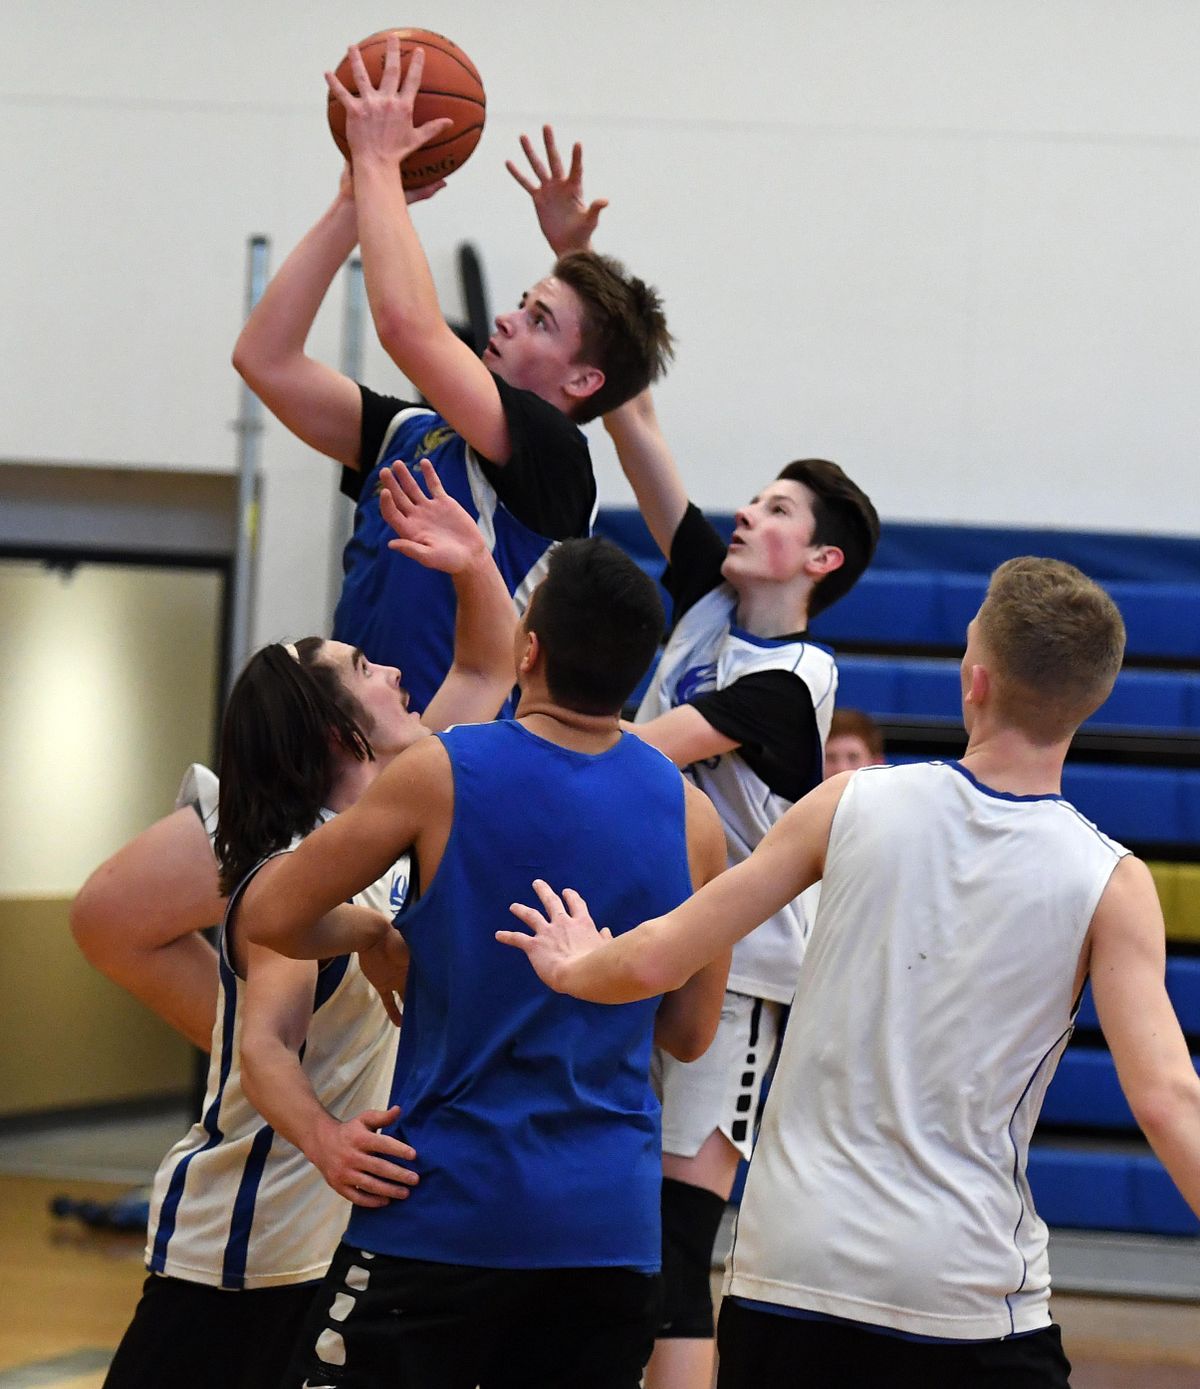 Deer Park High School varsity basketball player Gavin Hanson takes a shot at the basket during practice, Monday, Feb 10, 2020, at Deer Park High School. (Colin Mulvany / The Spokesman-Review)